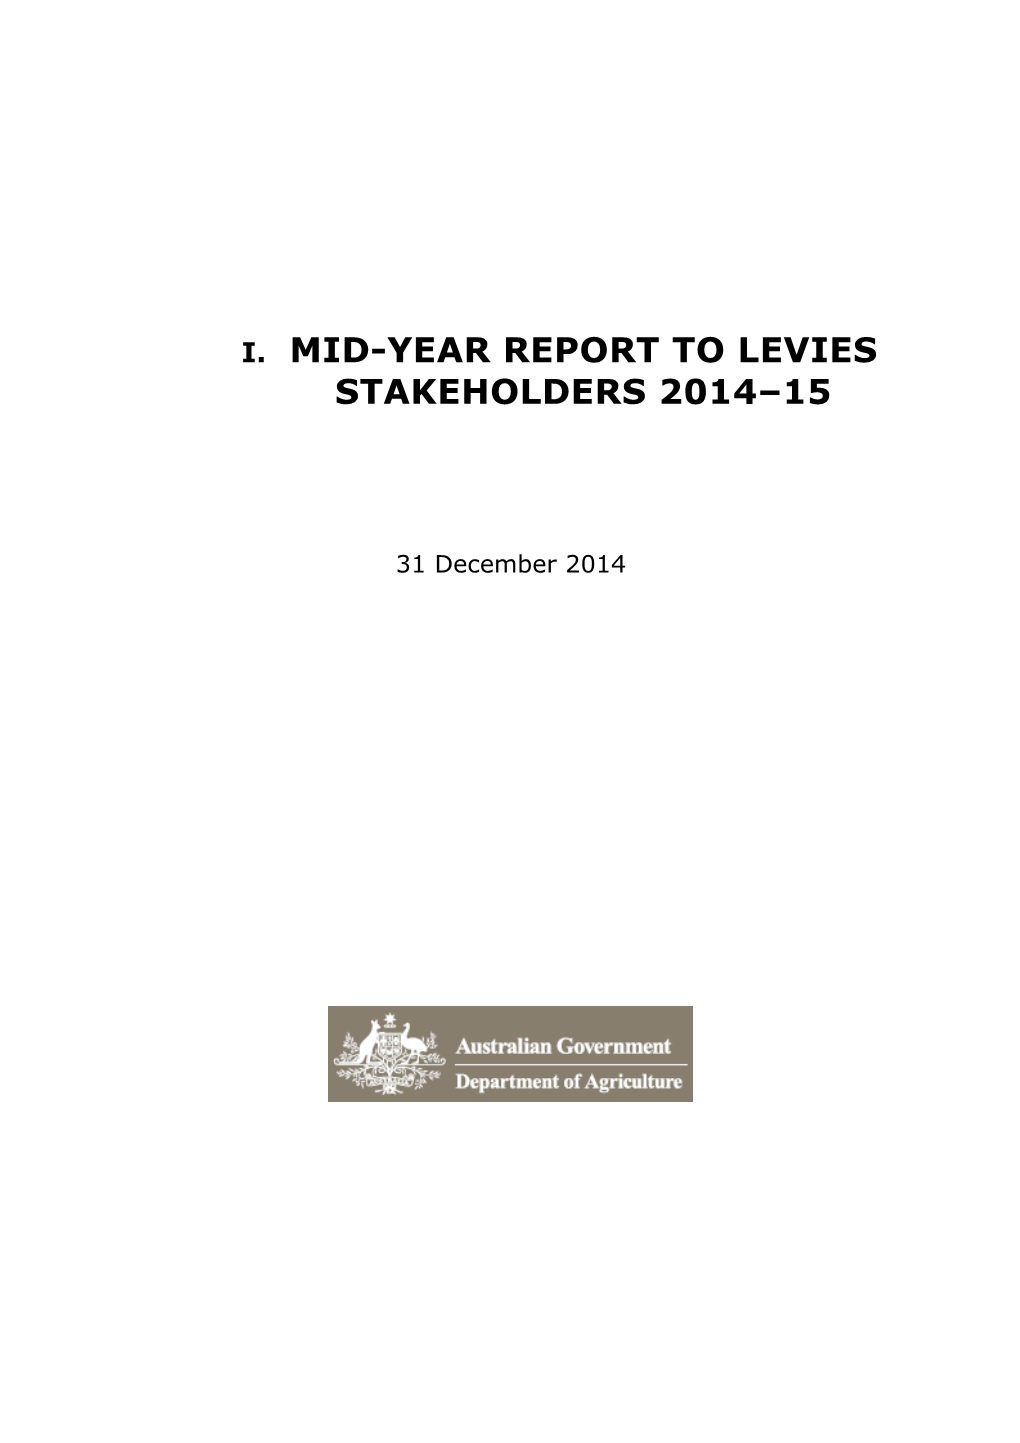 Report to Levies Stakeholders 2013-14